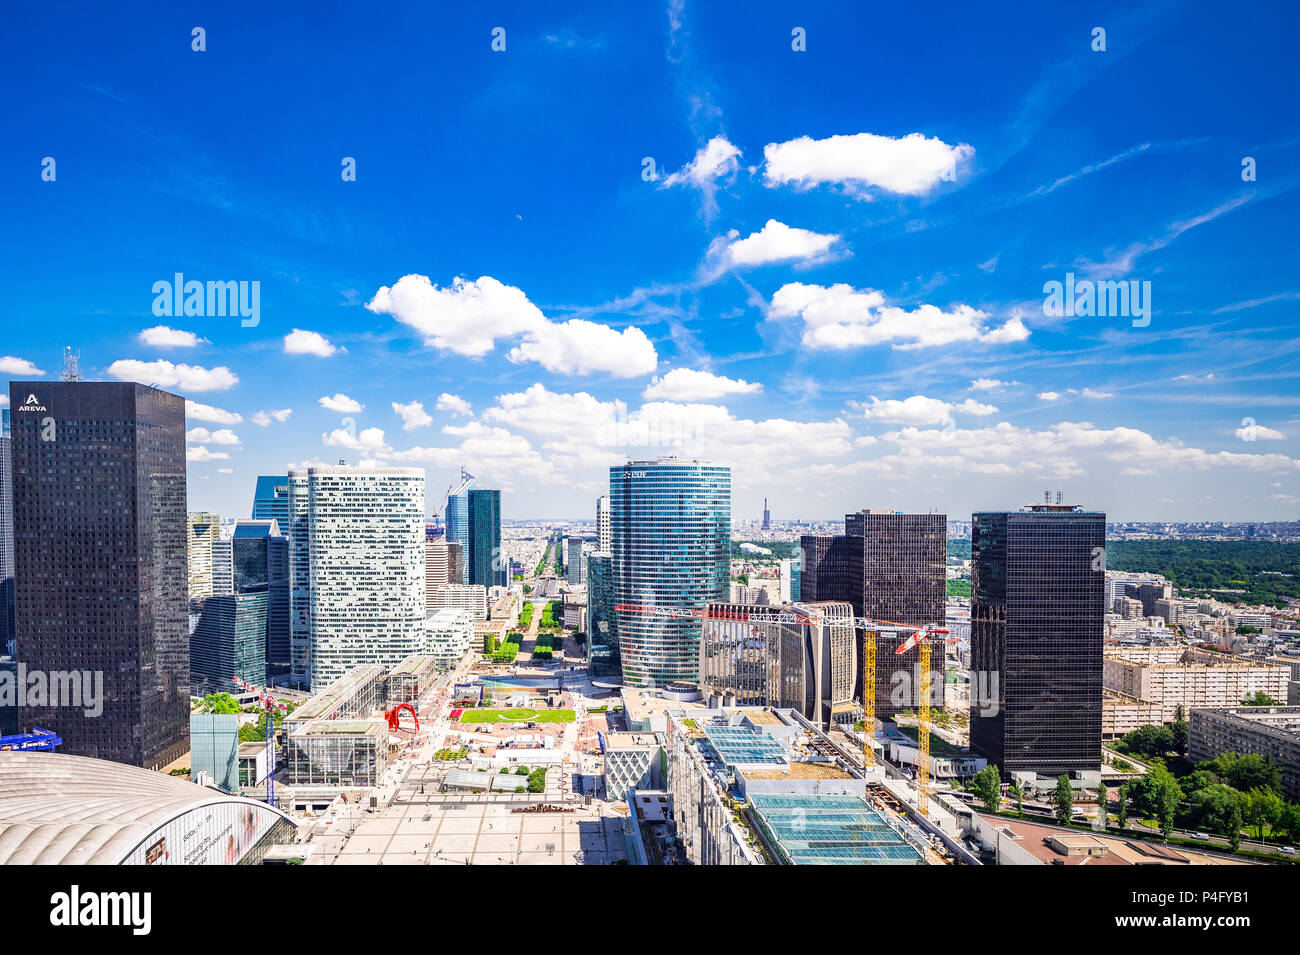 Views from the top of the Grand Arch within the La Defense area of Paris, France that houses an open-air museum. Stock Photo